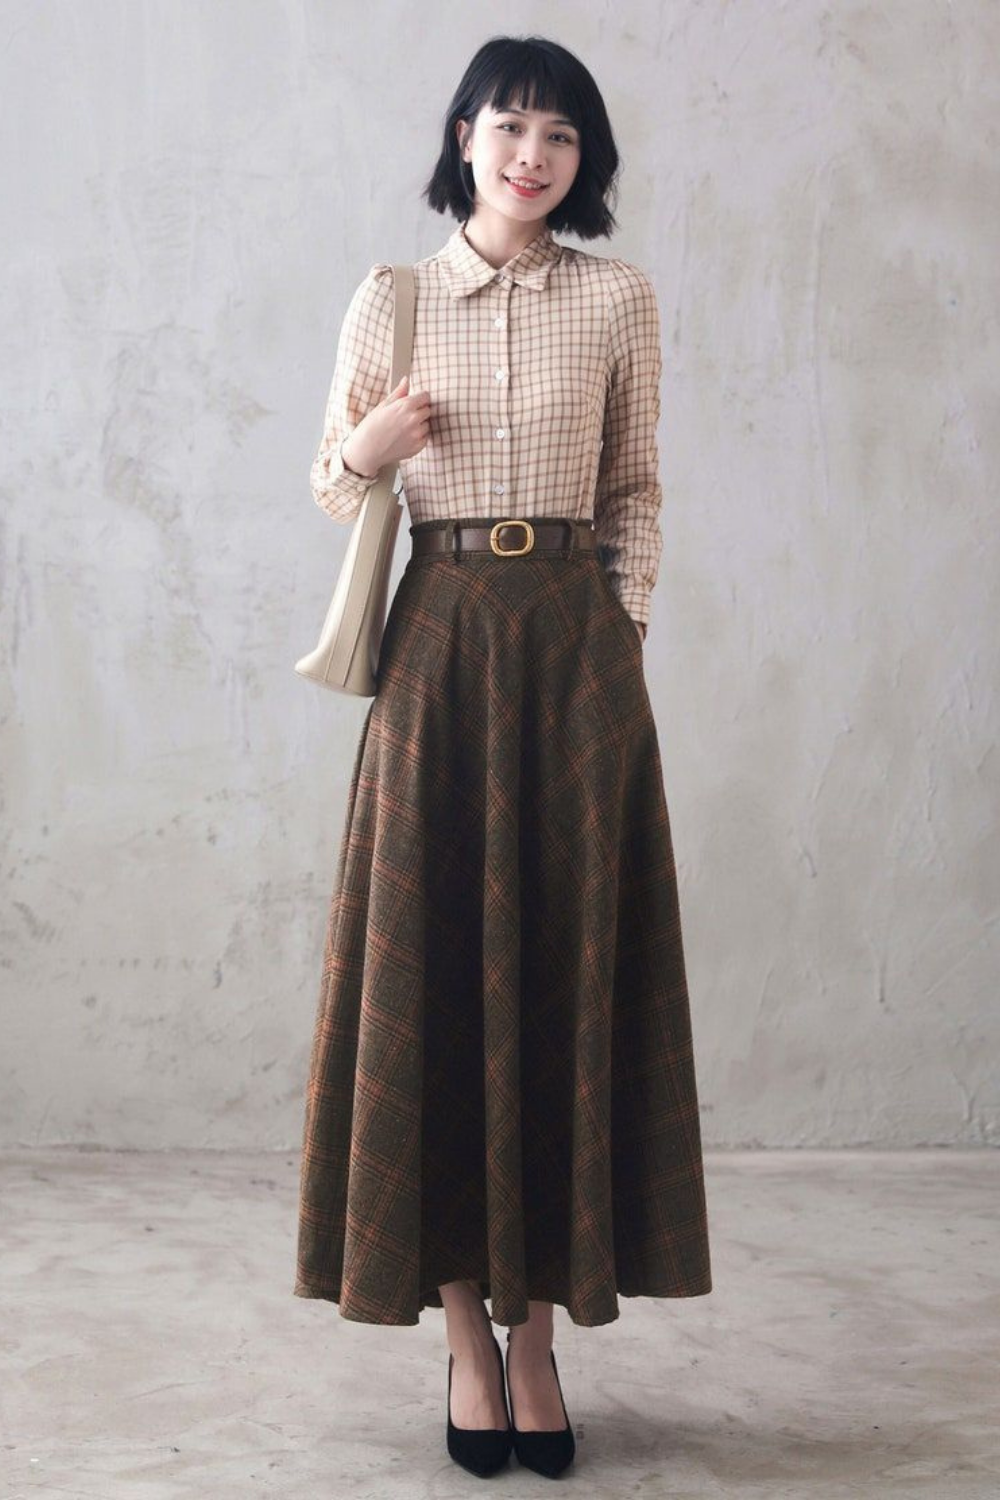 How to Style Plaid Wool Skirt: Top 13 Cozy Outfit Ideas for Women